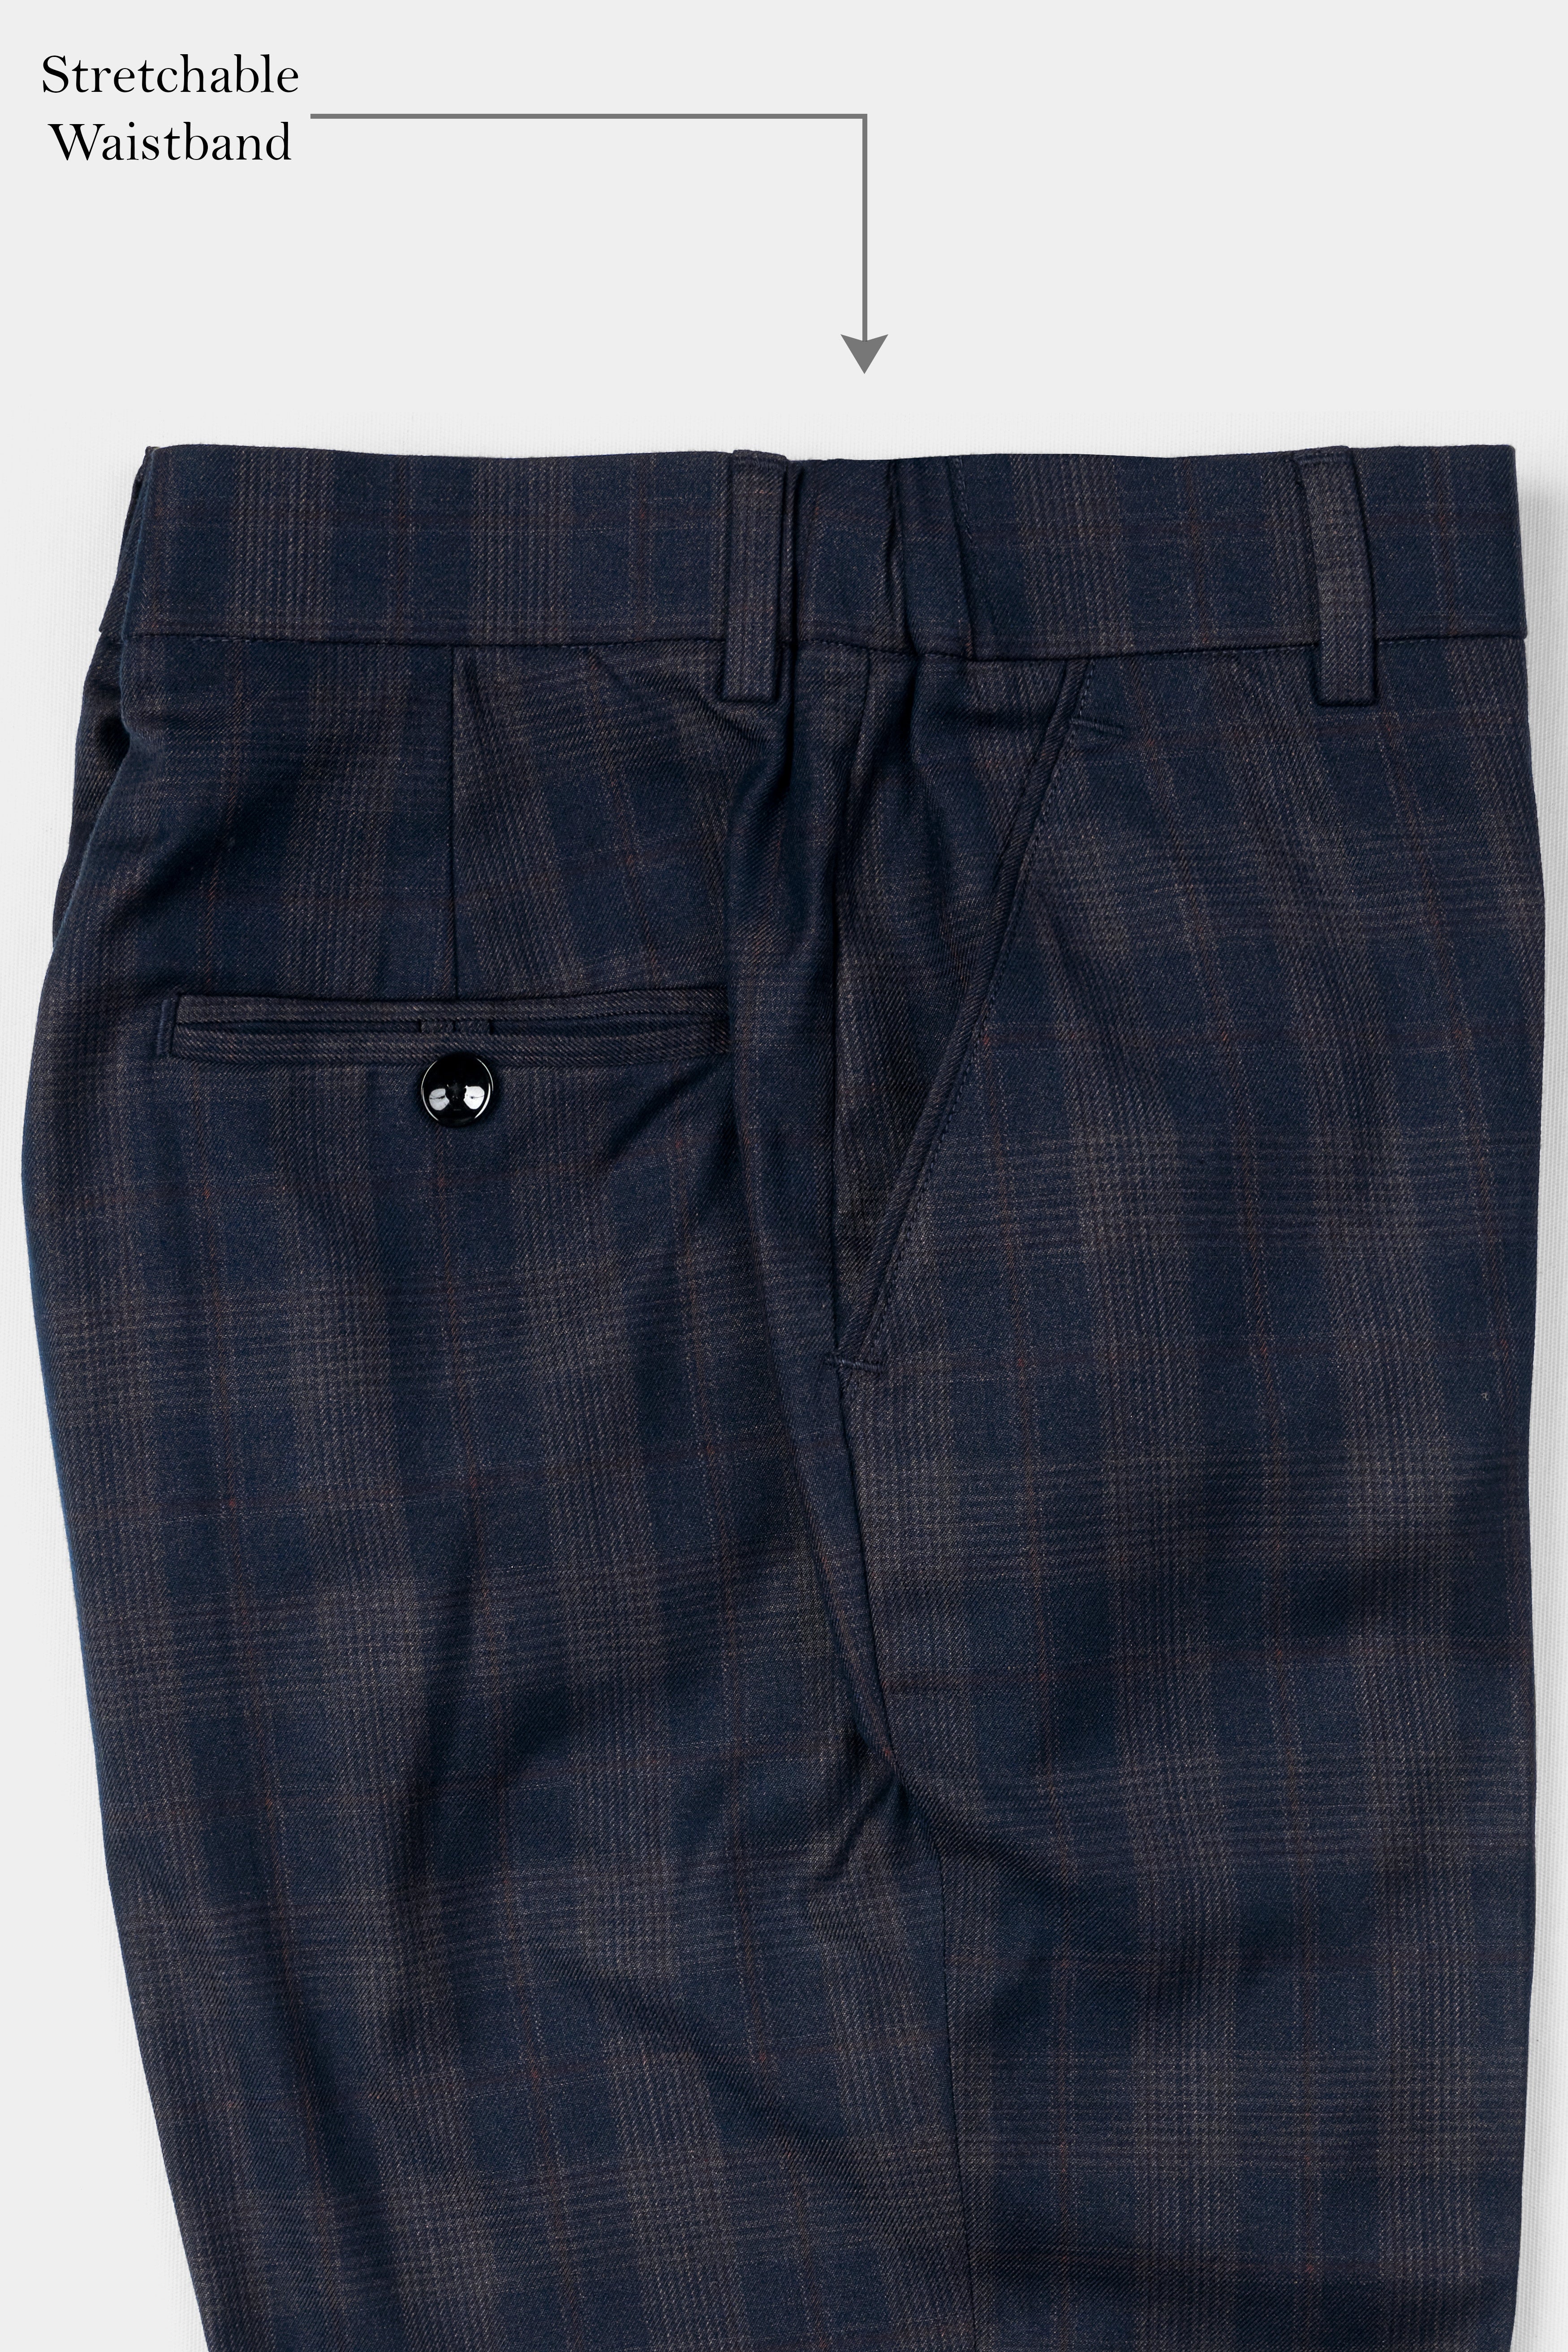 Admiral Blue and Cinereous Brown Plaid Wool Rich Pant T2872-28, T2872-30, T2872-32, T2872-34, T2872-36, T2872-38, T2872-40, T2872-42, T2872-44